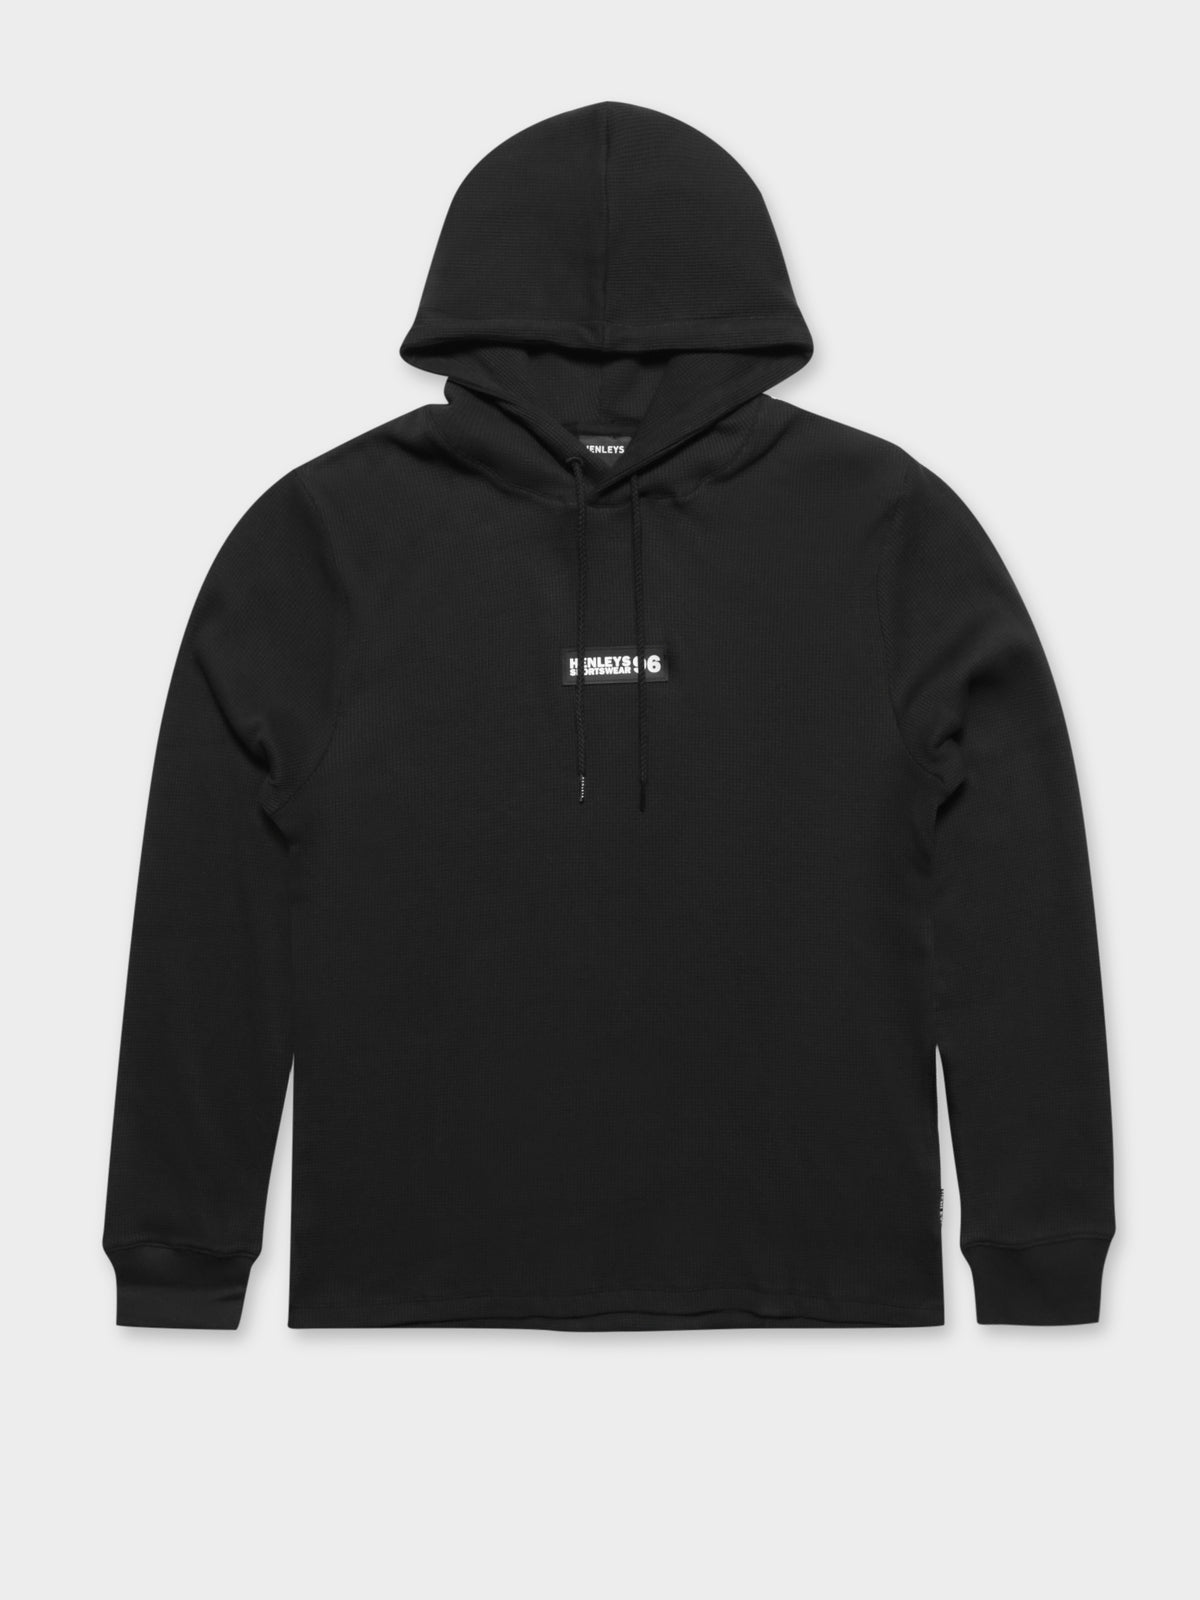 Newman Long Sleeve Hooded T-Shirt in Black